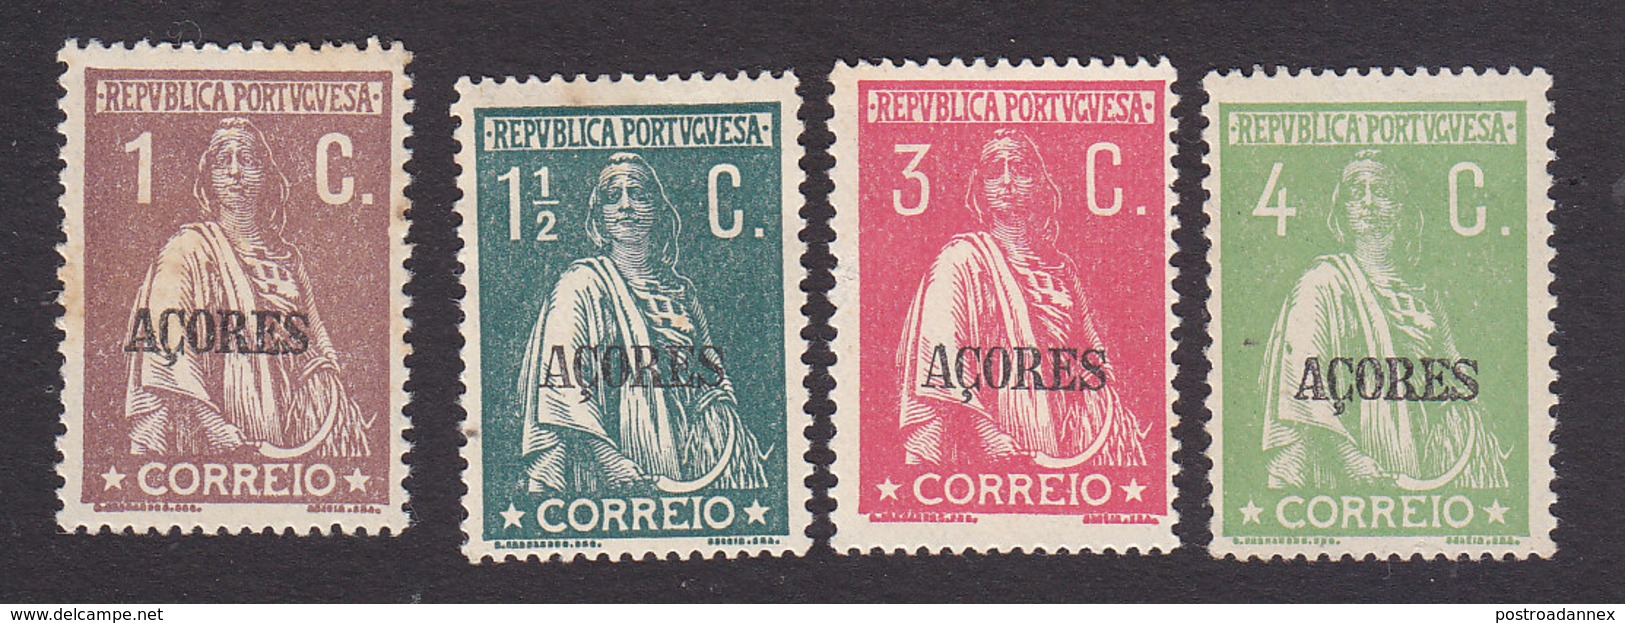 Azores, Scott #158, 160, 164, 167, Mint Hinged, Ceres Overprinted, Issued 1912 - Azores